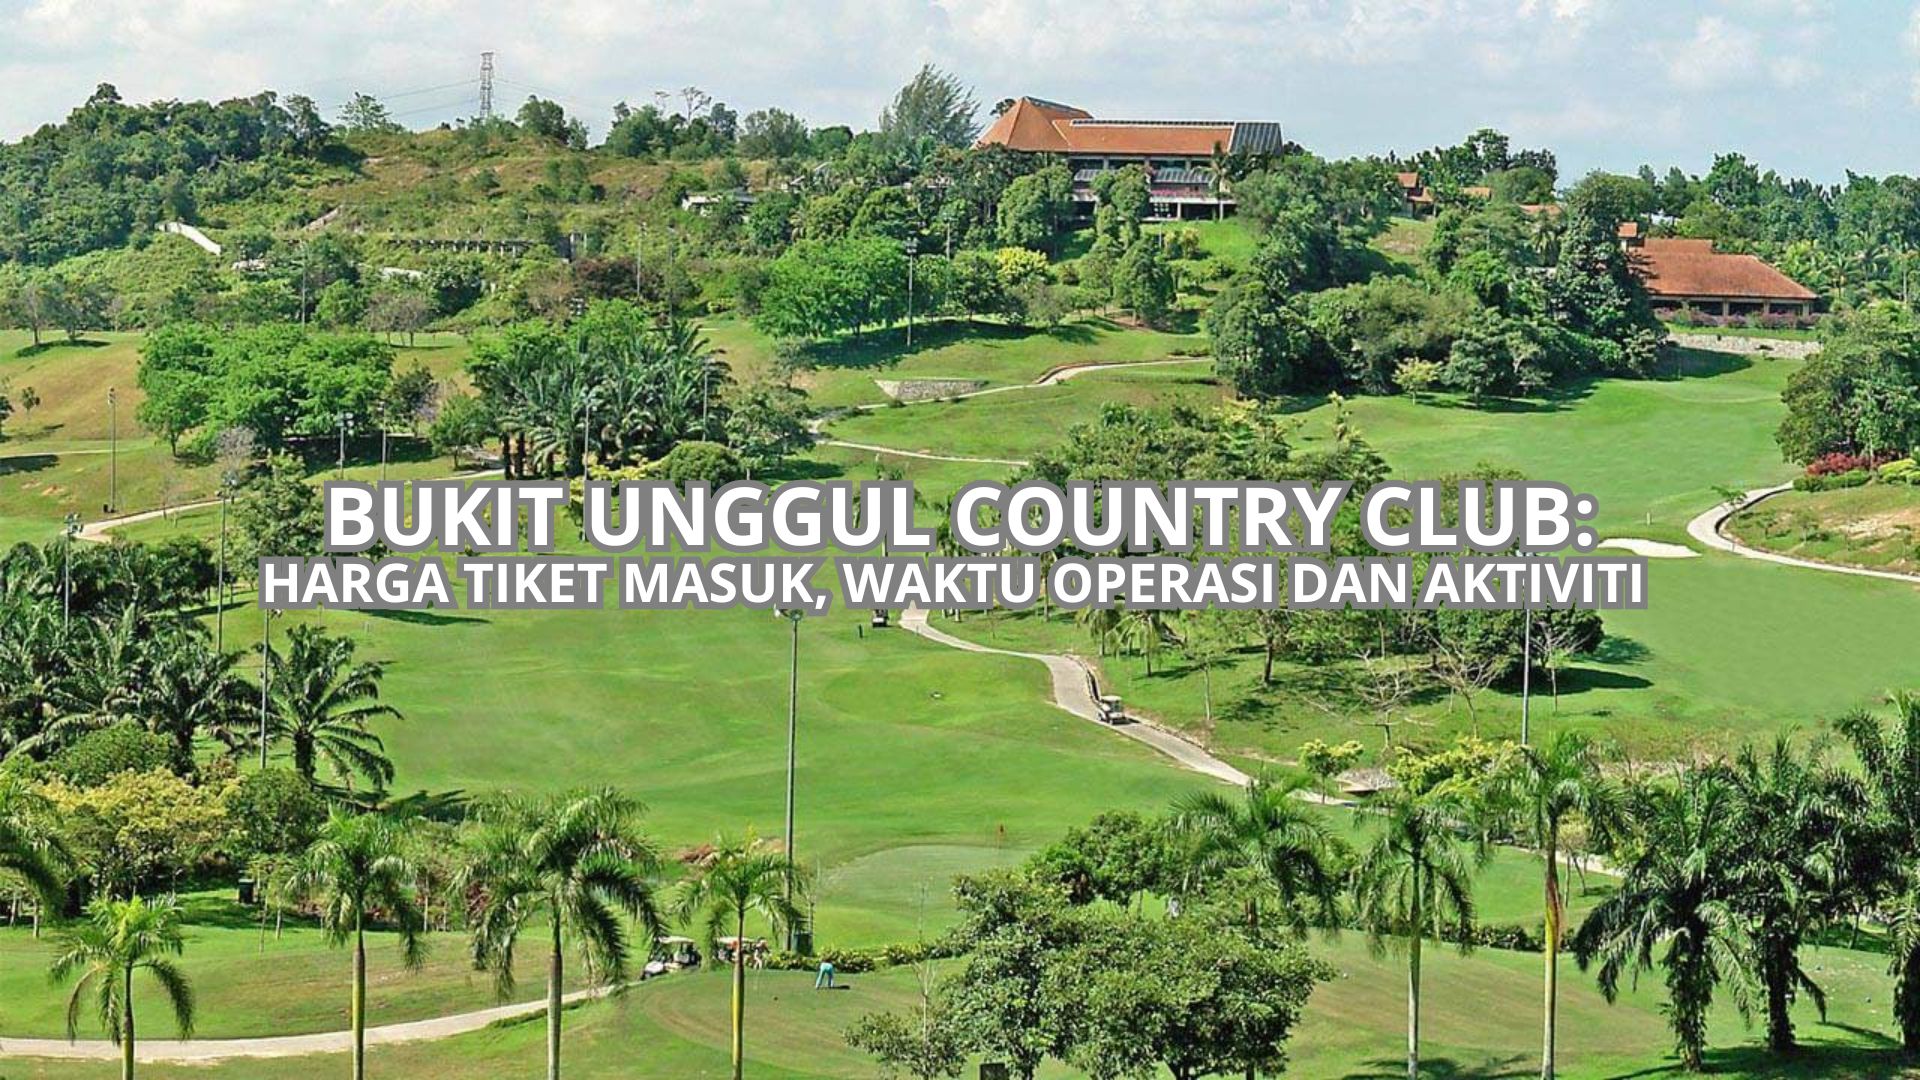 Bukit Unggul Country Club Cover